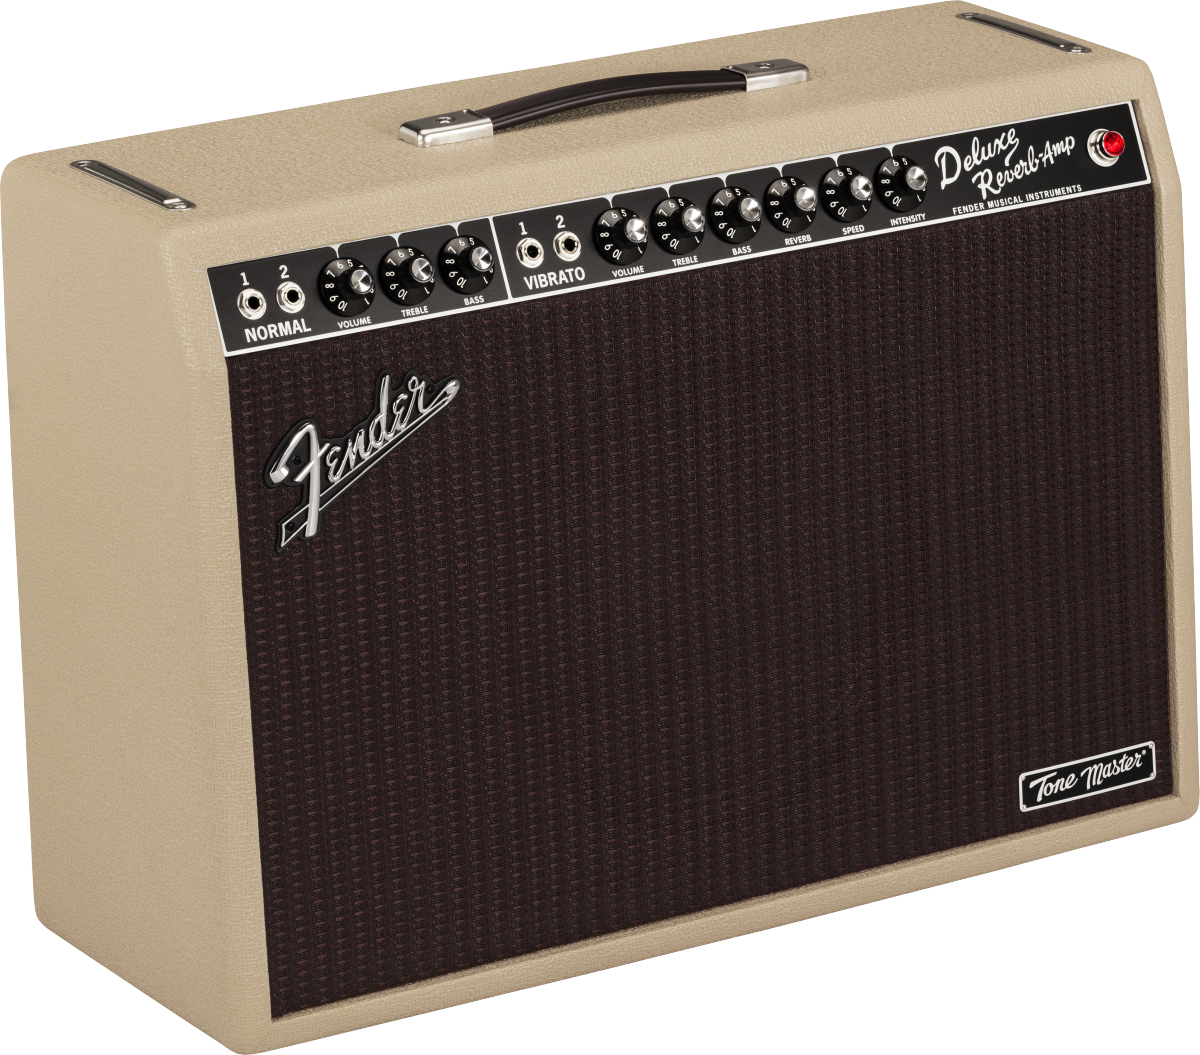 Fender Deluxe Reverb Tone Master 100w 1x12 Blonde - Electric guitar combo amp - Main picture